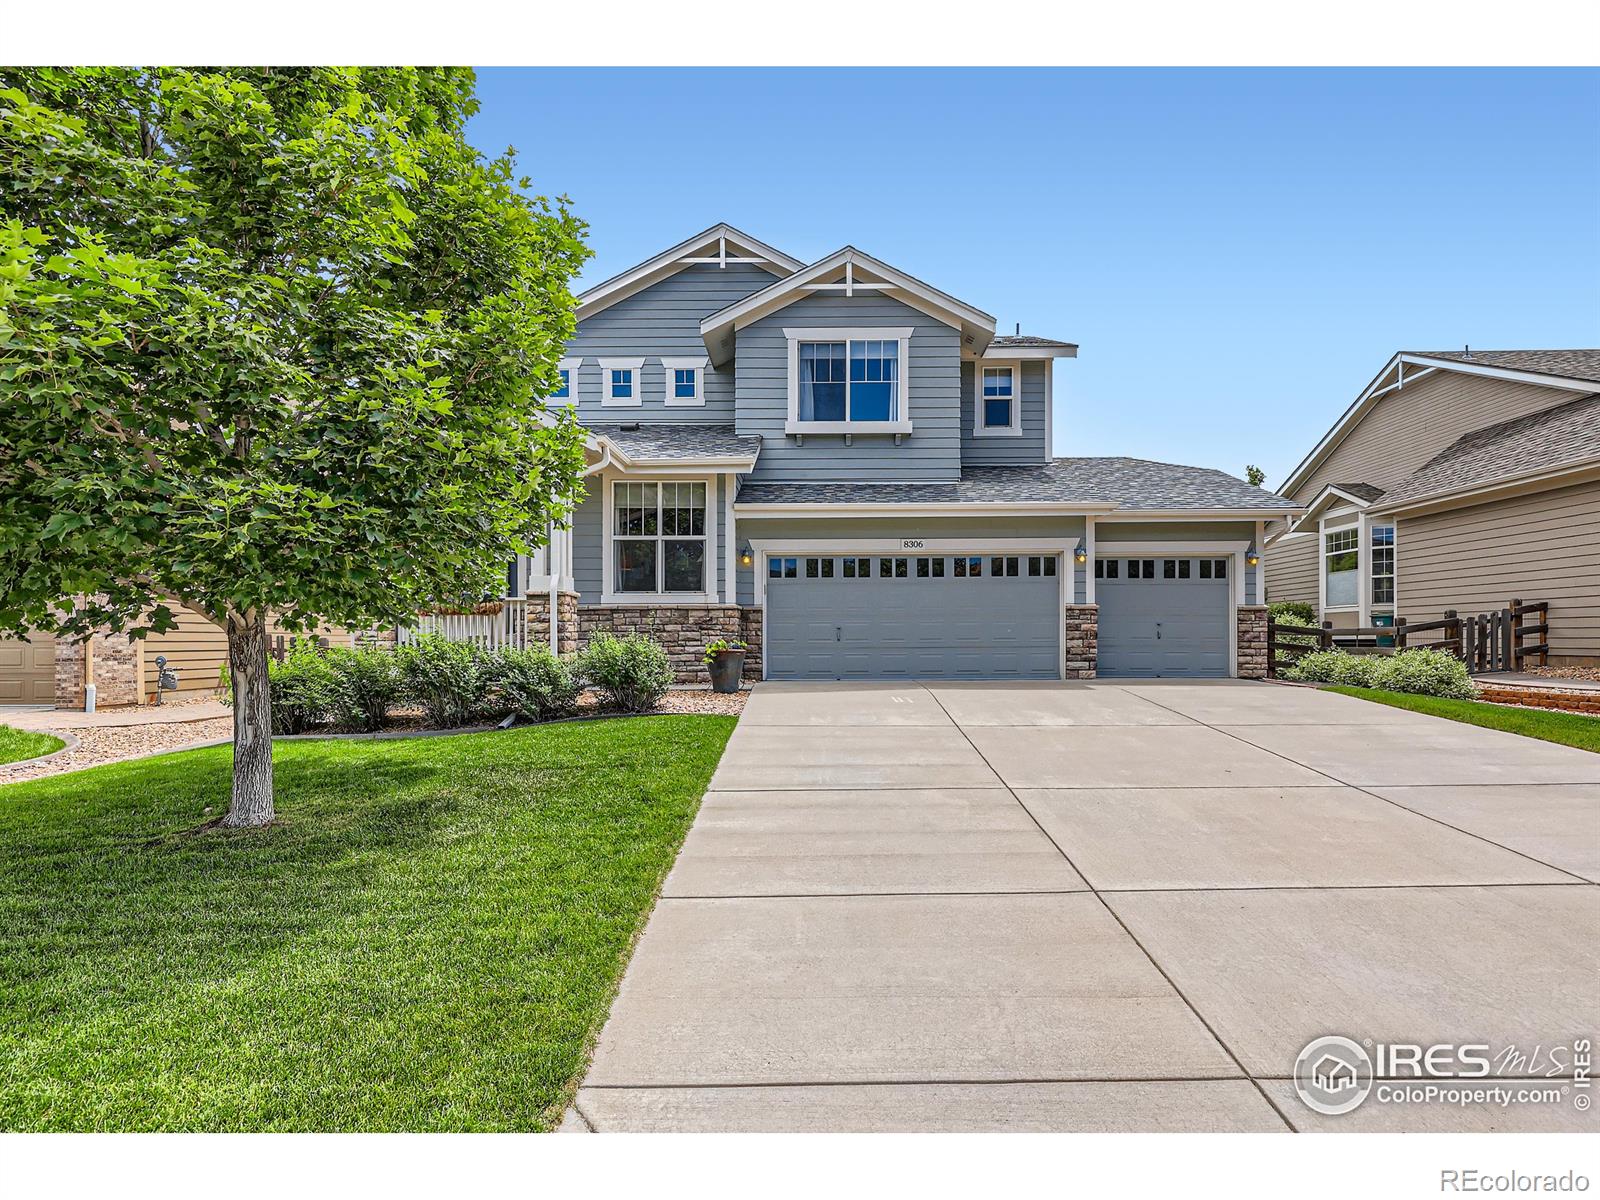 8306  dressage road, Littleton sold home. Closed on 2023-09-08 for $775,000.